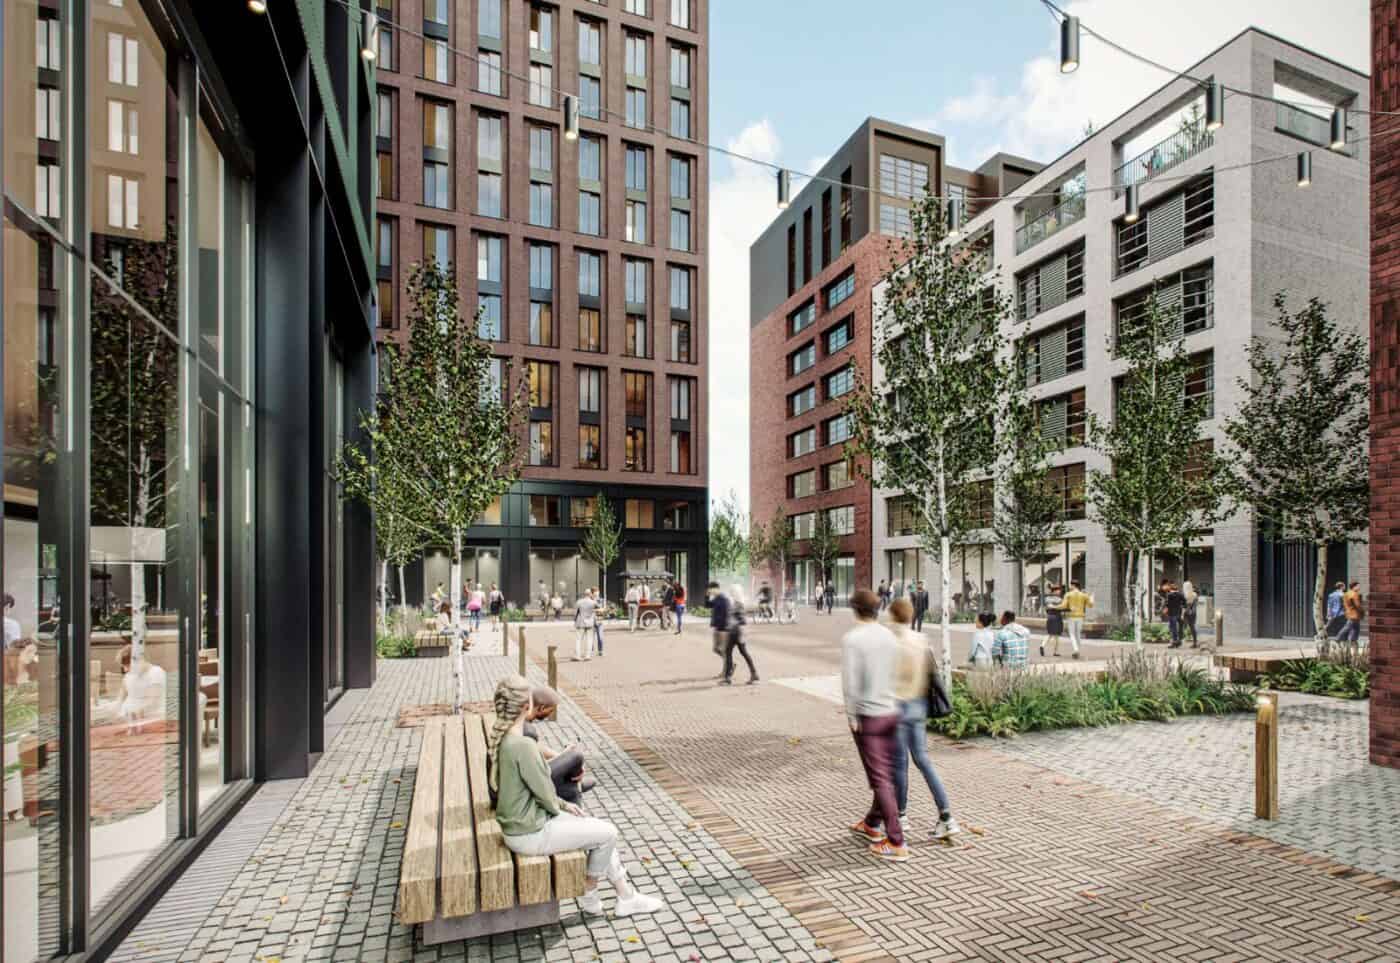 CGI of planned Birmingham apartment blocks, showing people wandering around the area